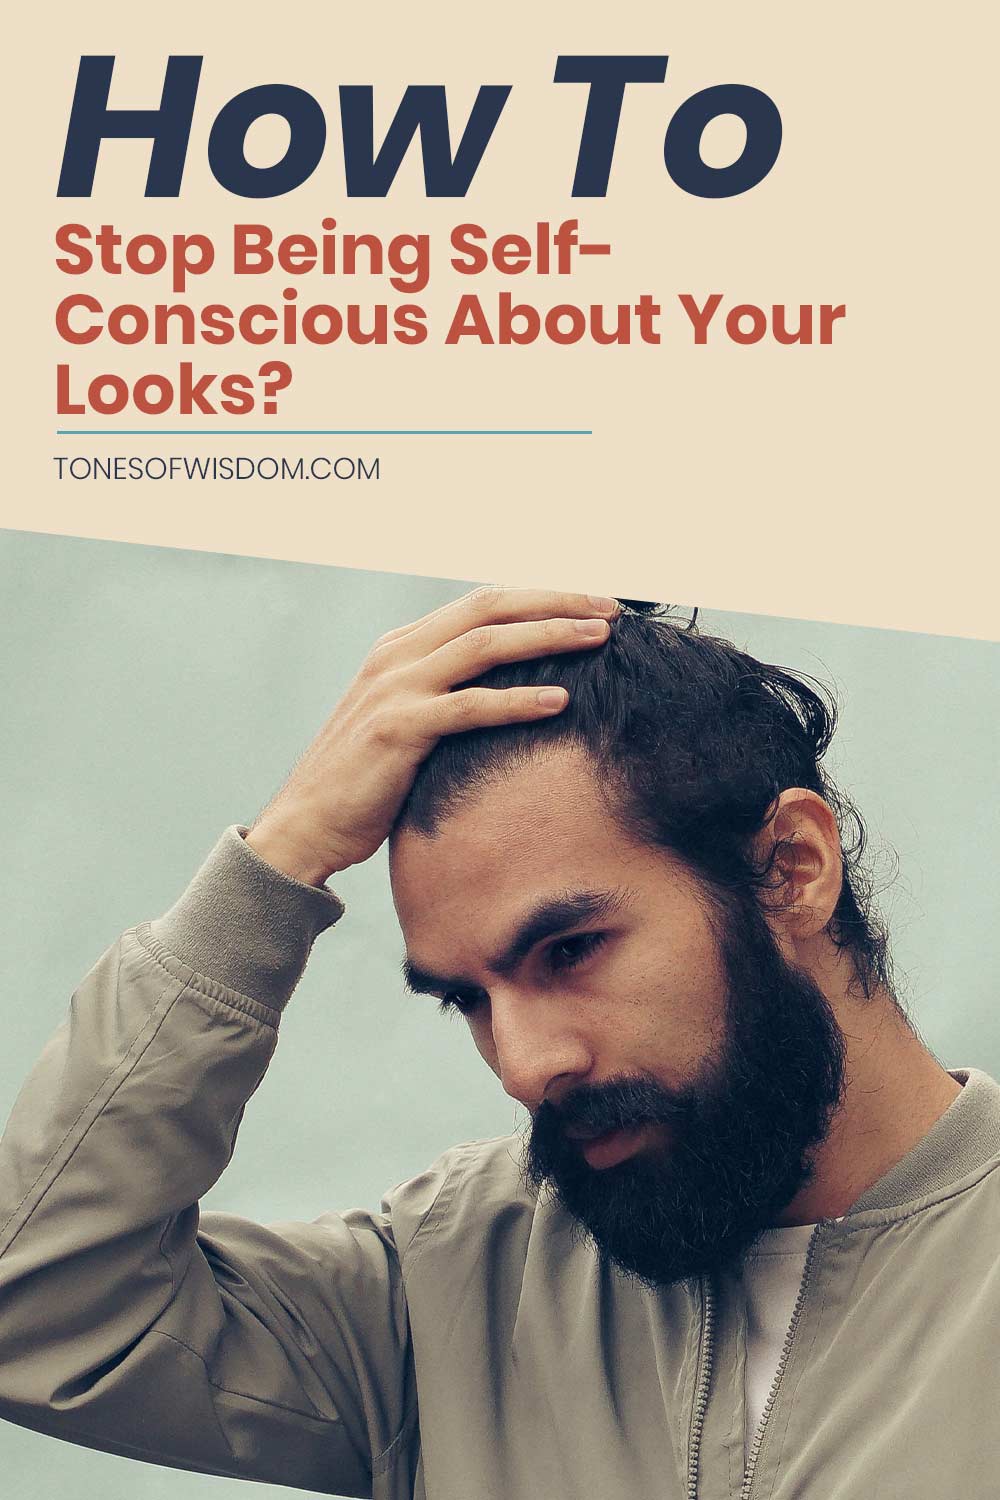 How To Stop Being Self-Conscious About Your Looks?